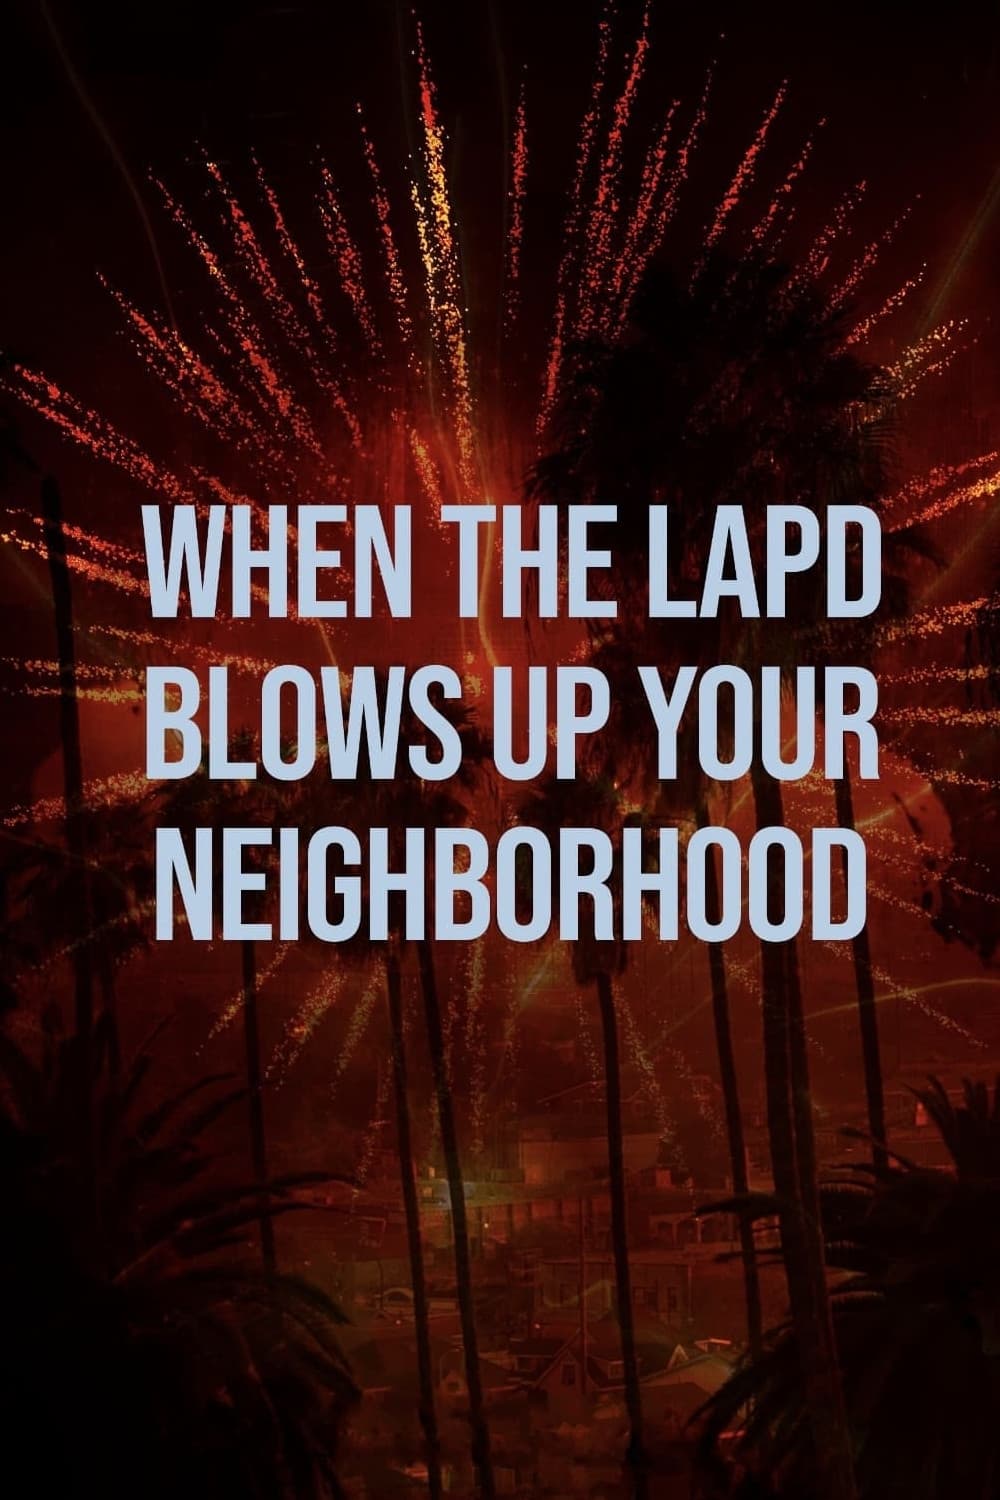 When the LAPD Blows Up Your Neighborhood